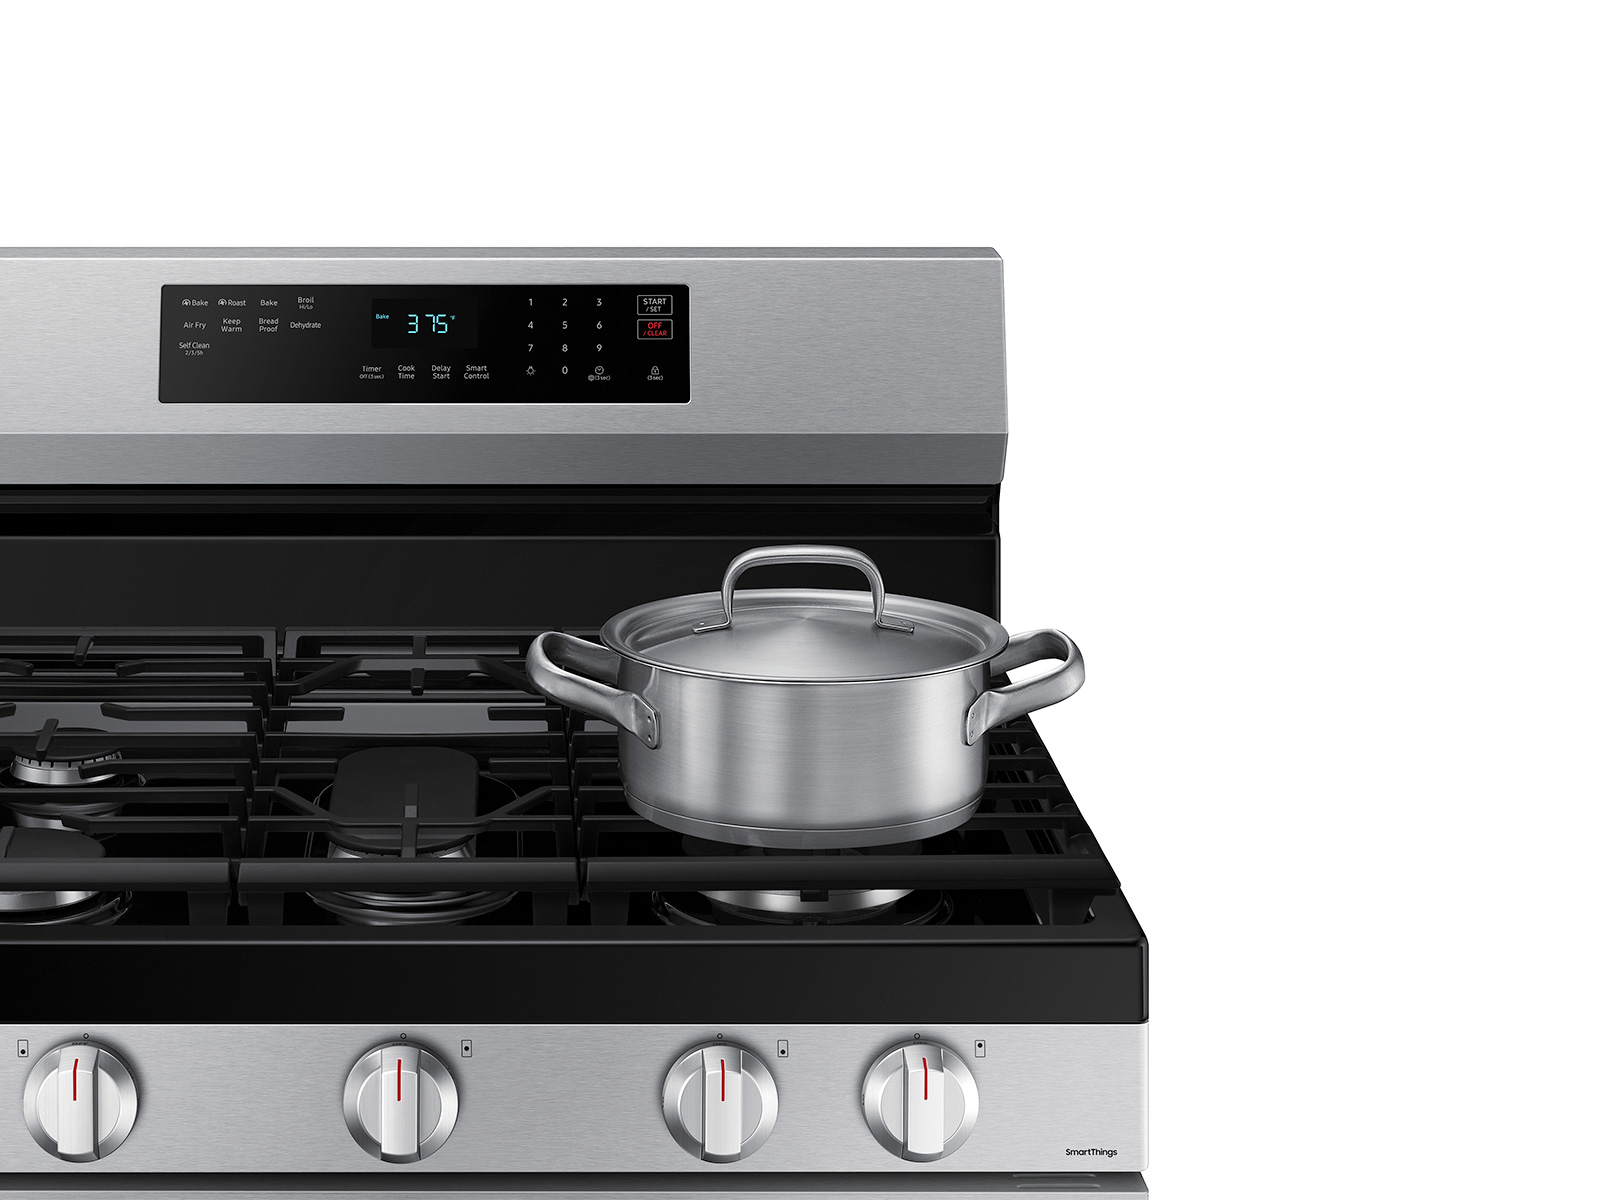 GE - 5.0 Cu. ft. Freestanding GAS Convection Range with Self-Steam Cleaning and No-Preheat Air Fry - Stainless Steel